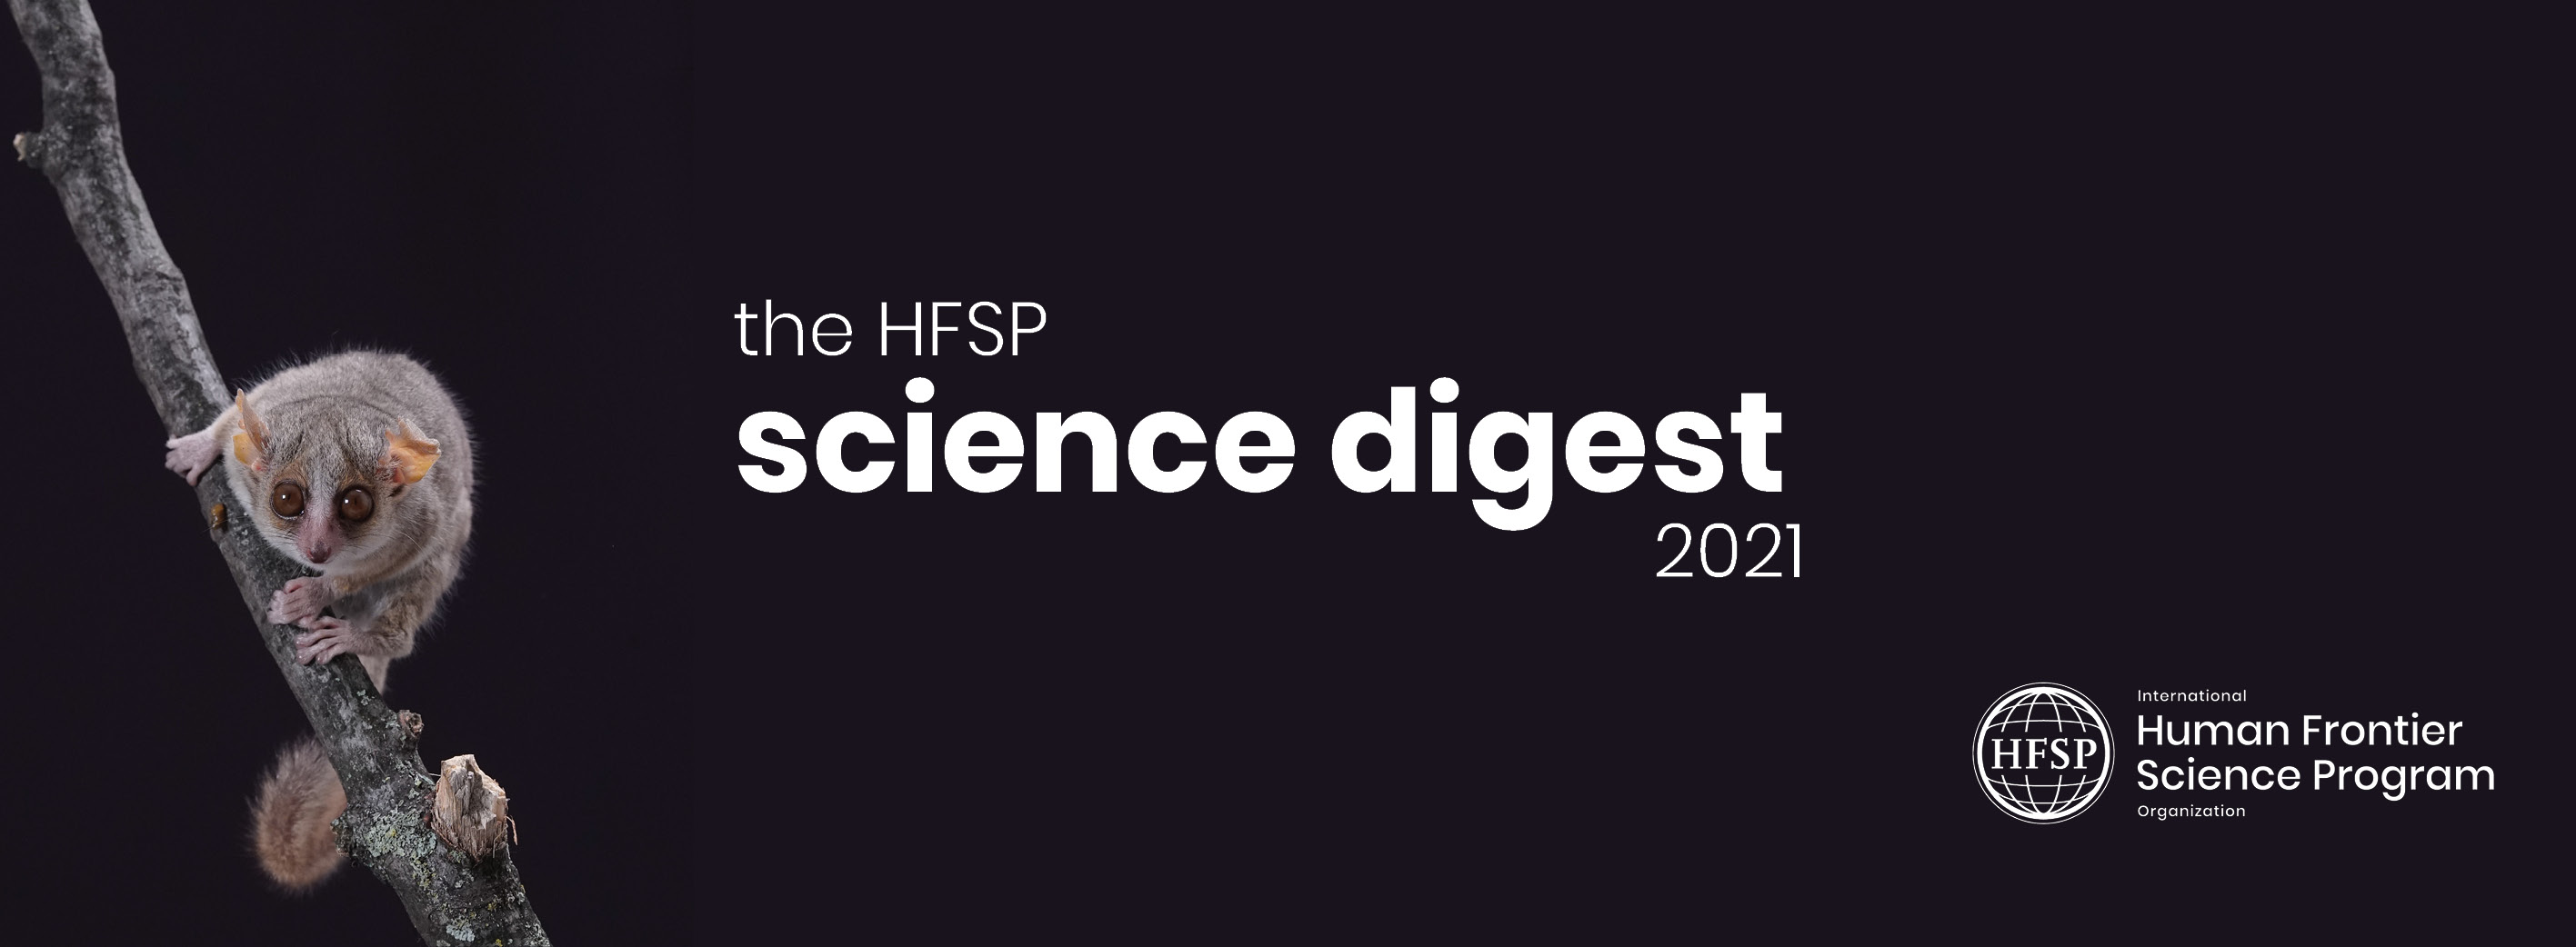 the HFSP science digest 2021